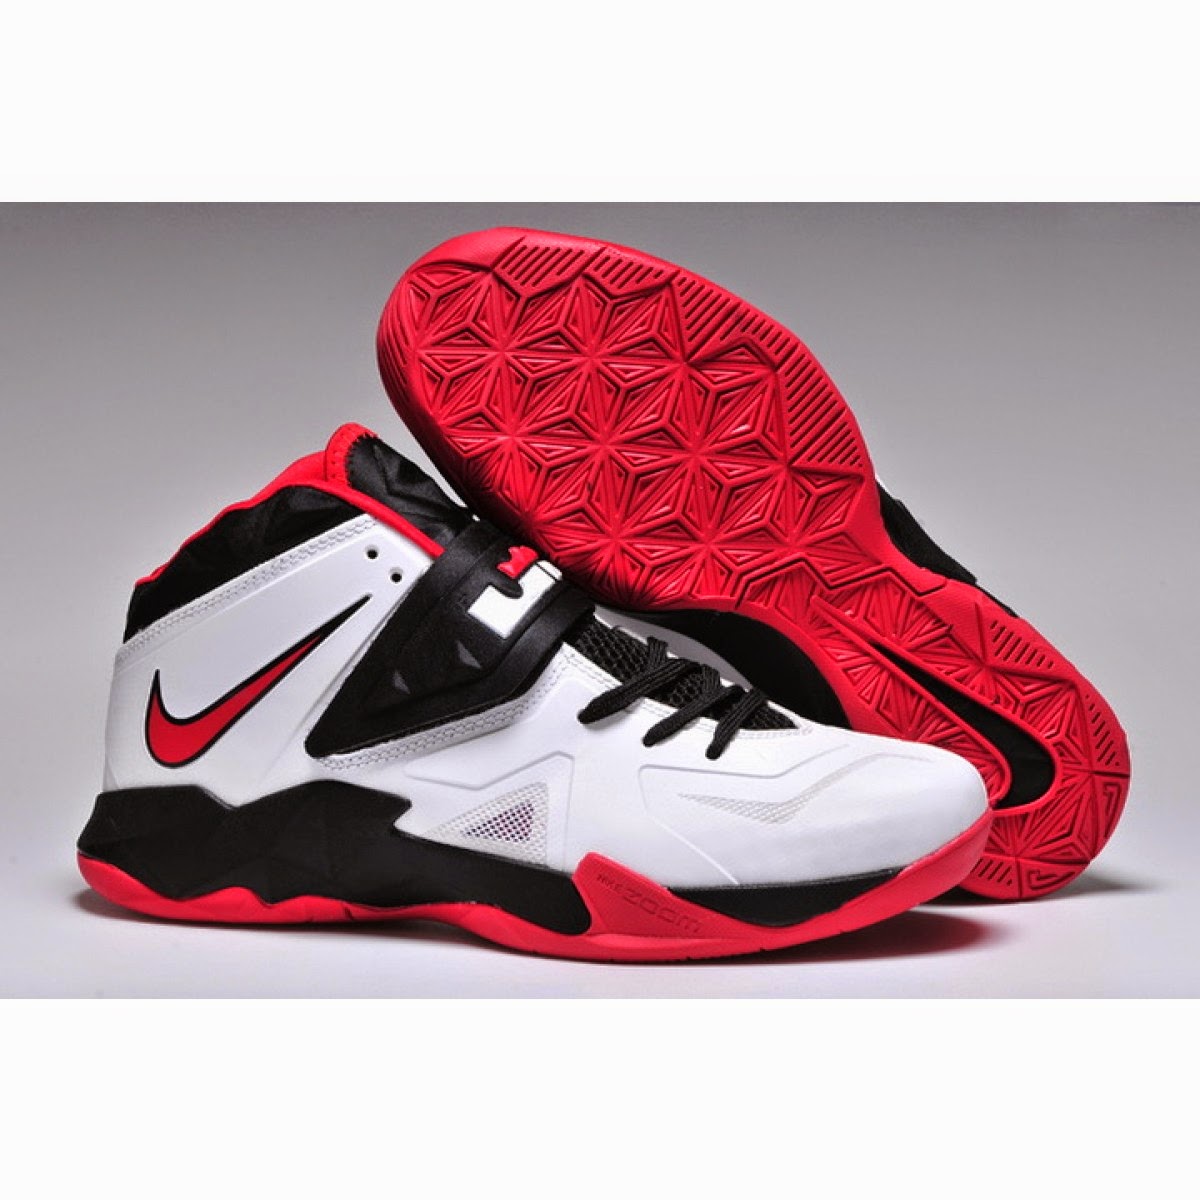 Nike Lebron 7 VII Soldier 2013 White Black Running Shoes For Sale | Fashion&#39;s Feel | Tips and ...